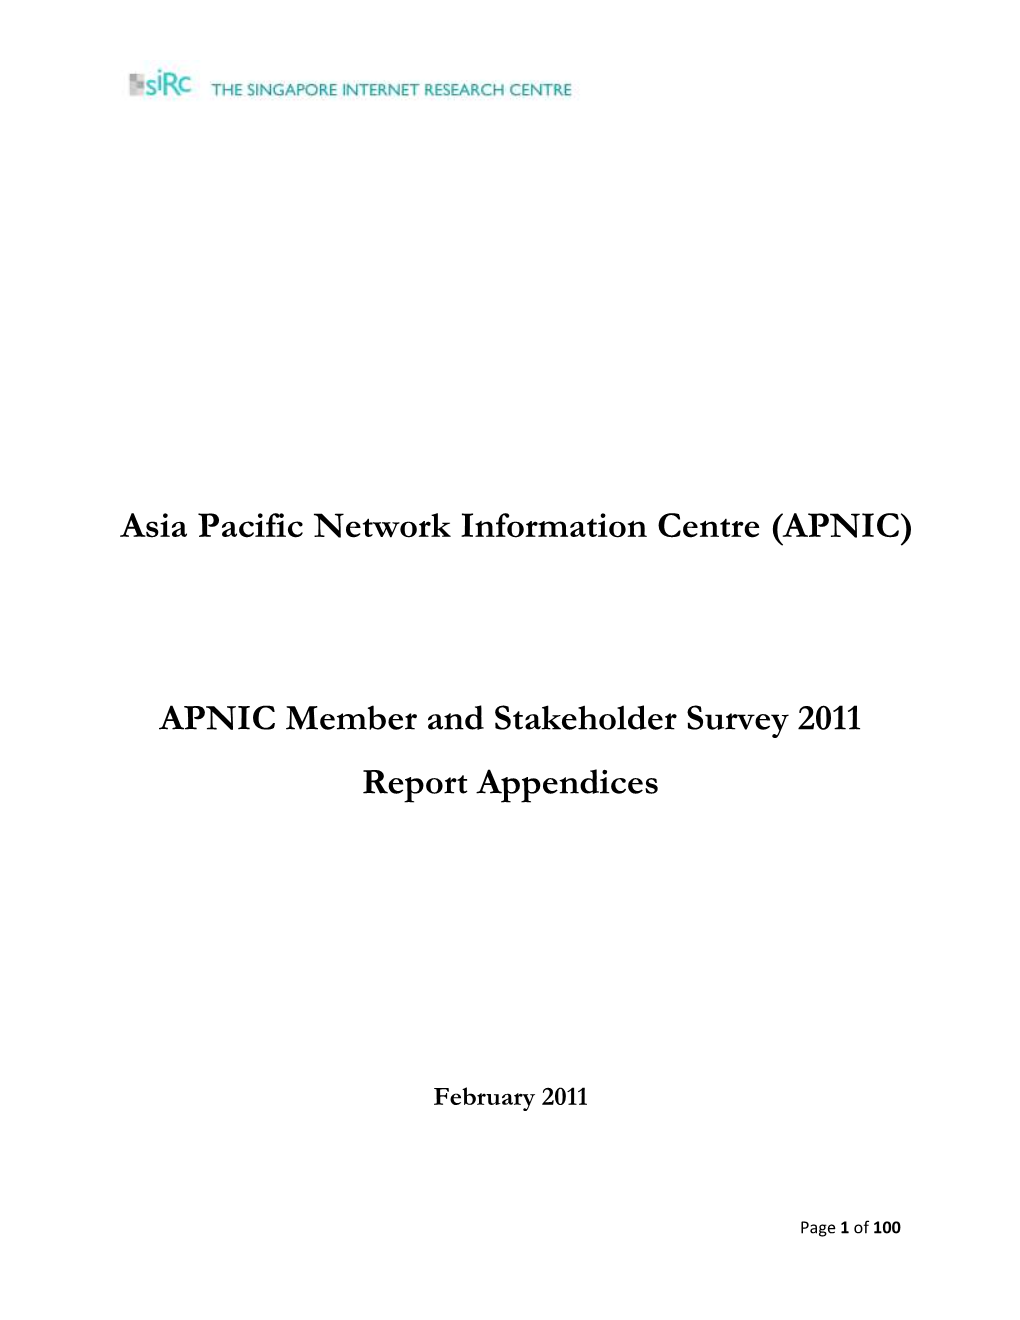 APNIC Member and Stakeholder Survey 2011 Report Appendices